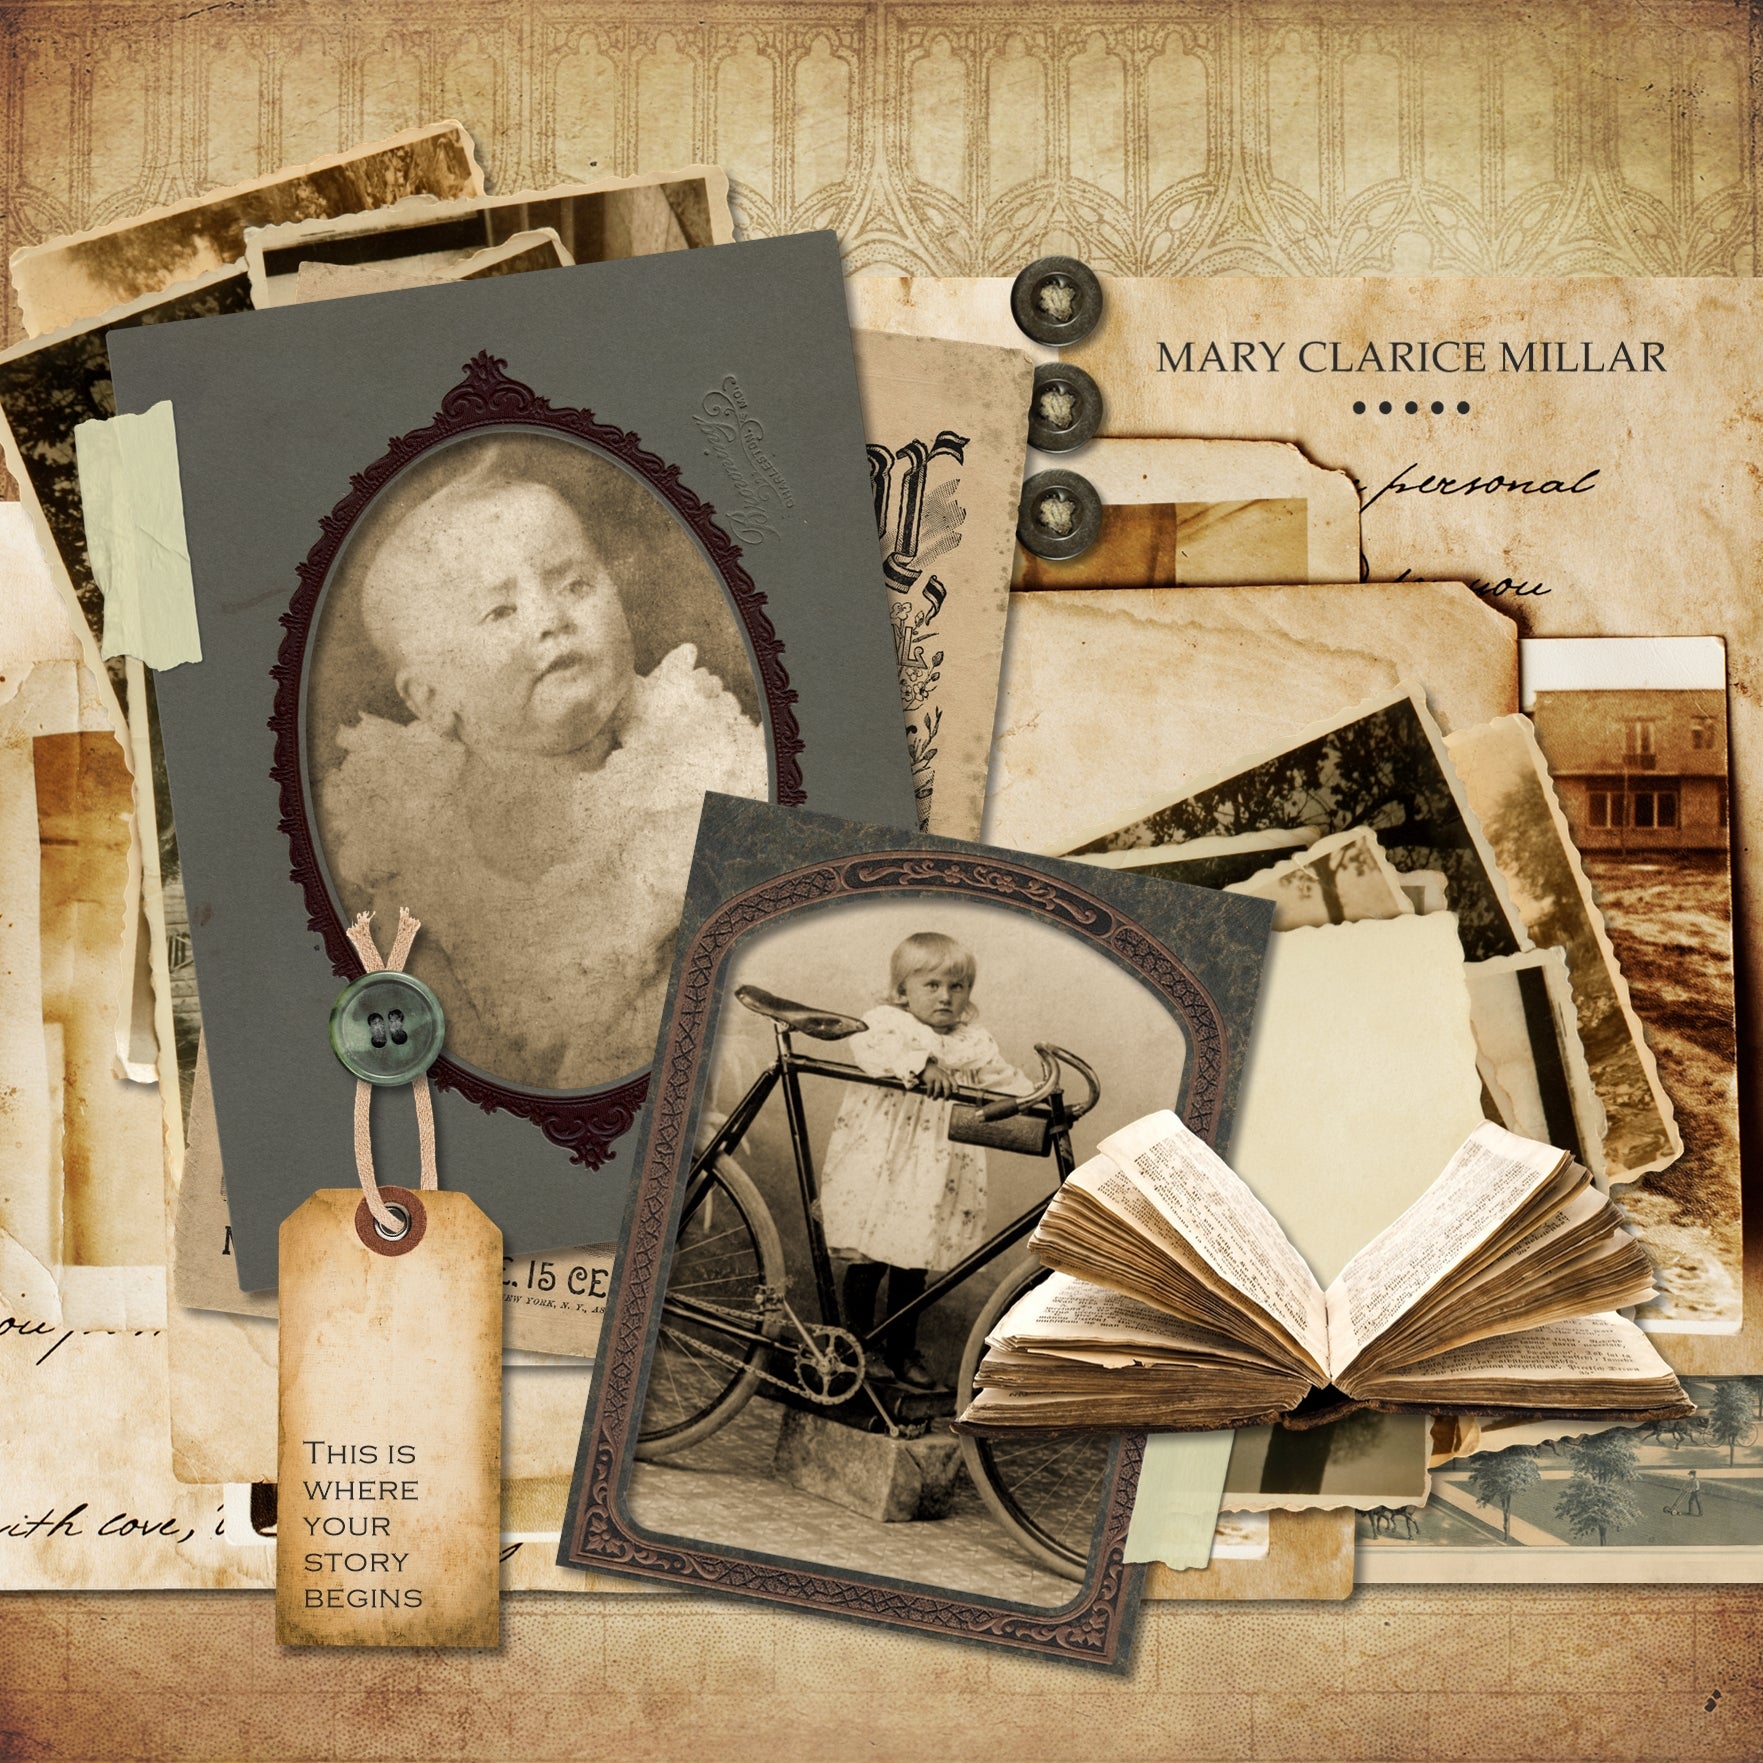 As a welcome addition to our vintage digital art collections, Basic Vintage Digital Scrapbook Kit contains over 60 vintage elements, including frames, labels, and papers. It contains everything you’ll need to get you started on your family history and genealogy scrapbook projects as it captures the times of the 1920’s - 1940’s and is neutral in its color palette while it still offers a wide variety of antique embellishments to choose from.